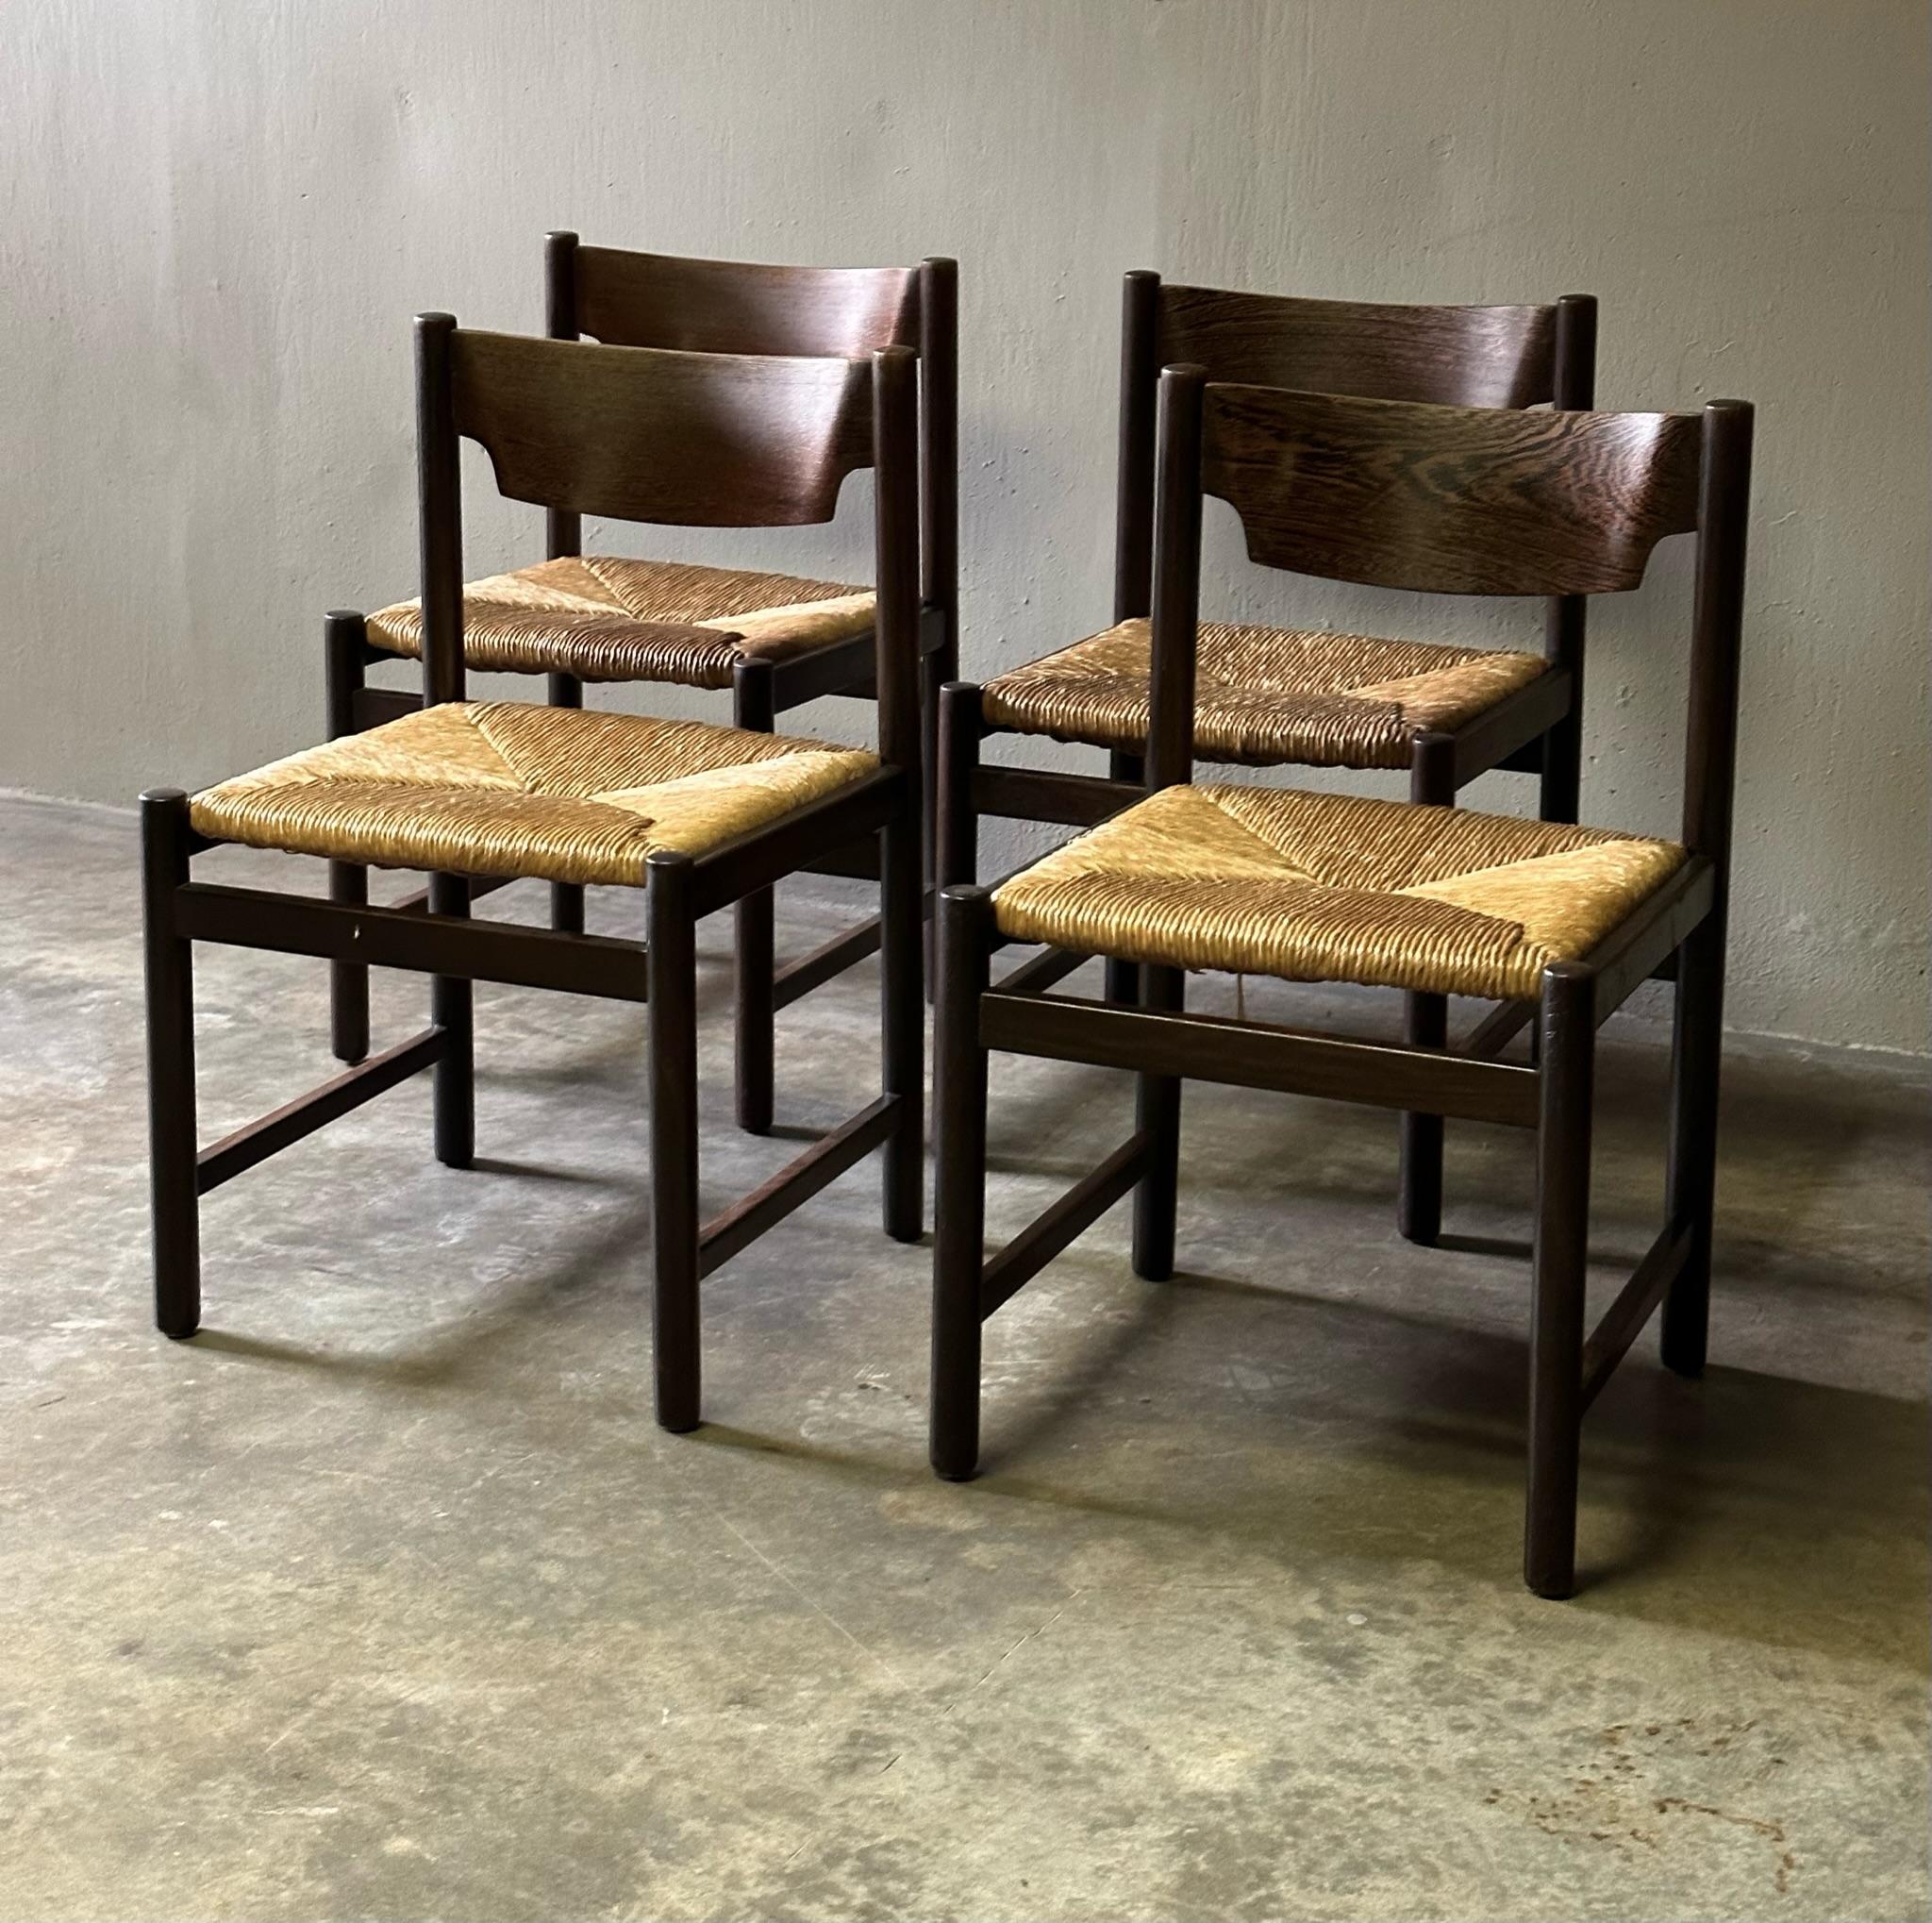 Set of Four Wenge Chairs by Martin Visser for Spectrum In Good Condition For Sale In Los Angeles, CA